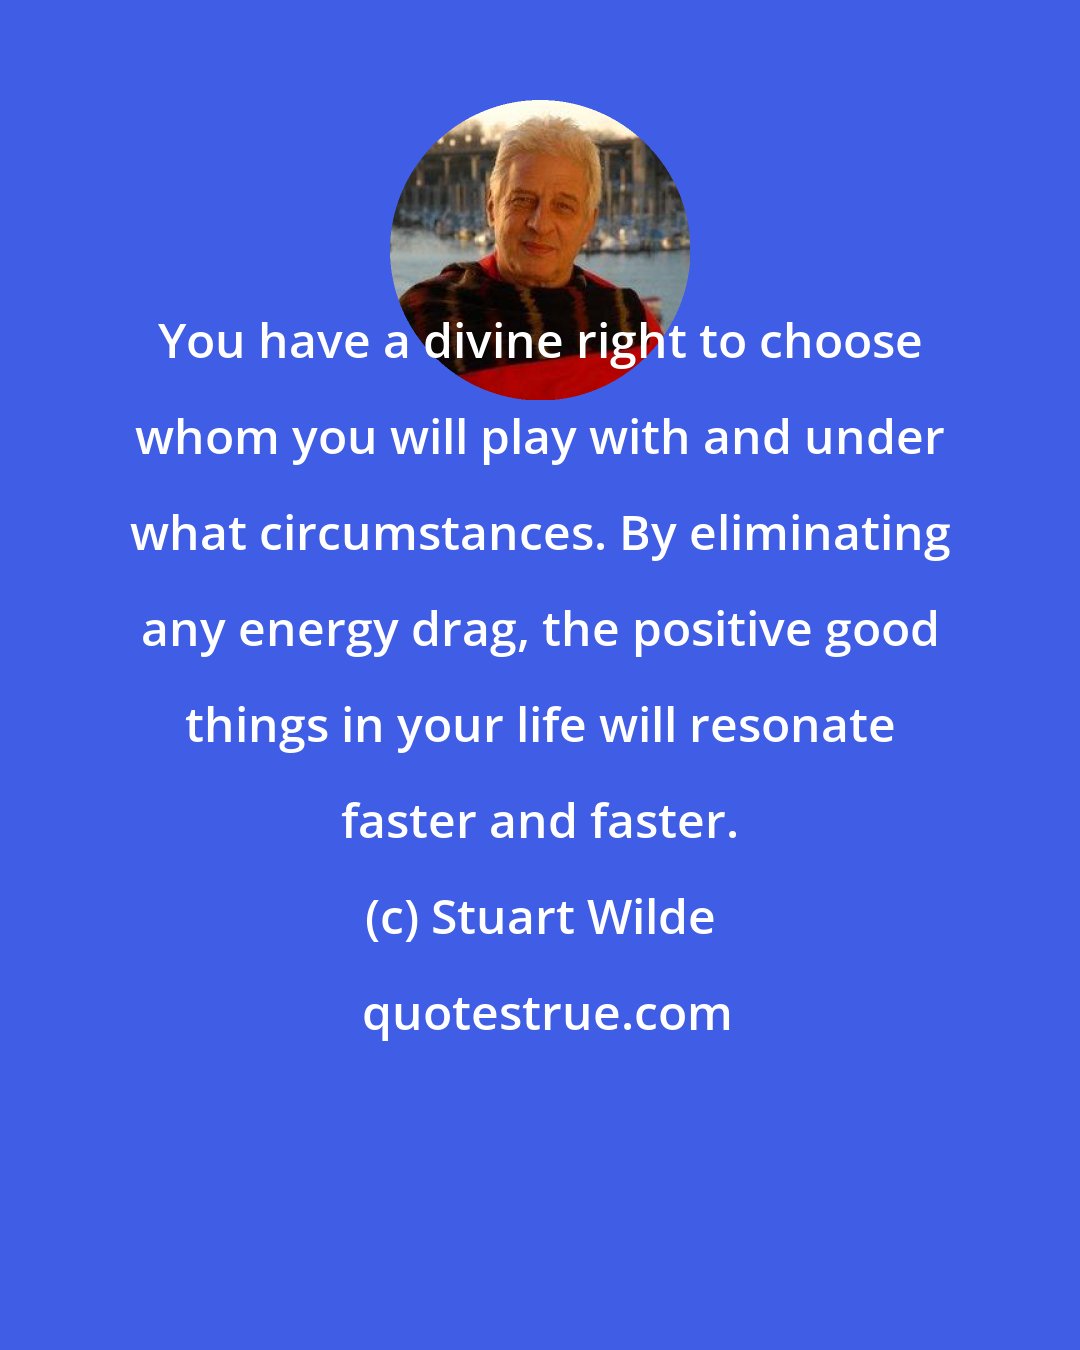 Stuart Wilde: You have a divine right to choose whom you will play with and under what circumstances. By eliminating any energy drag, the positive good things in your life will resonate faster and faster.